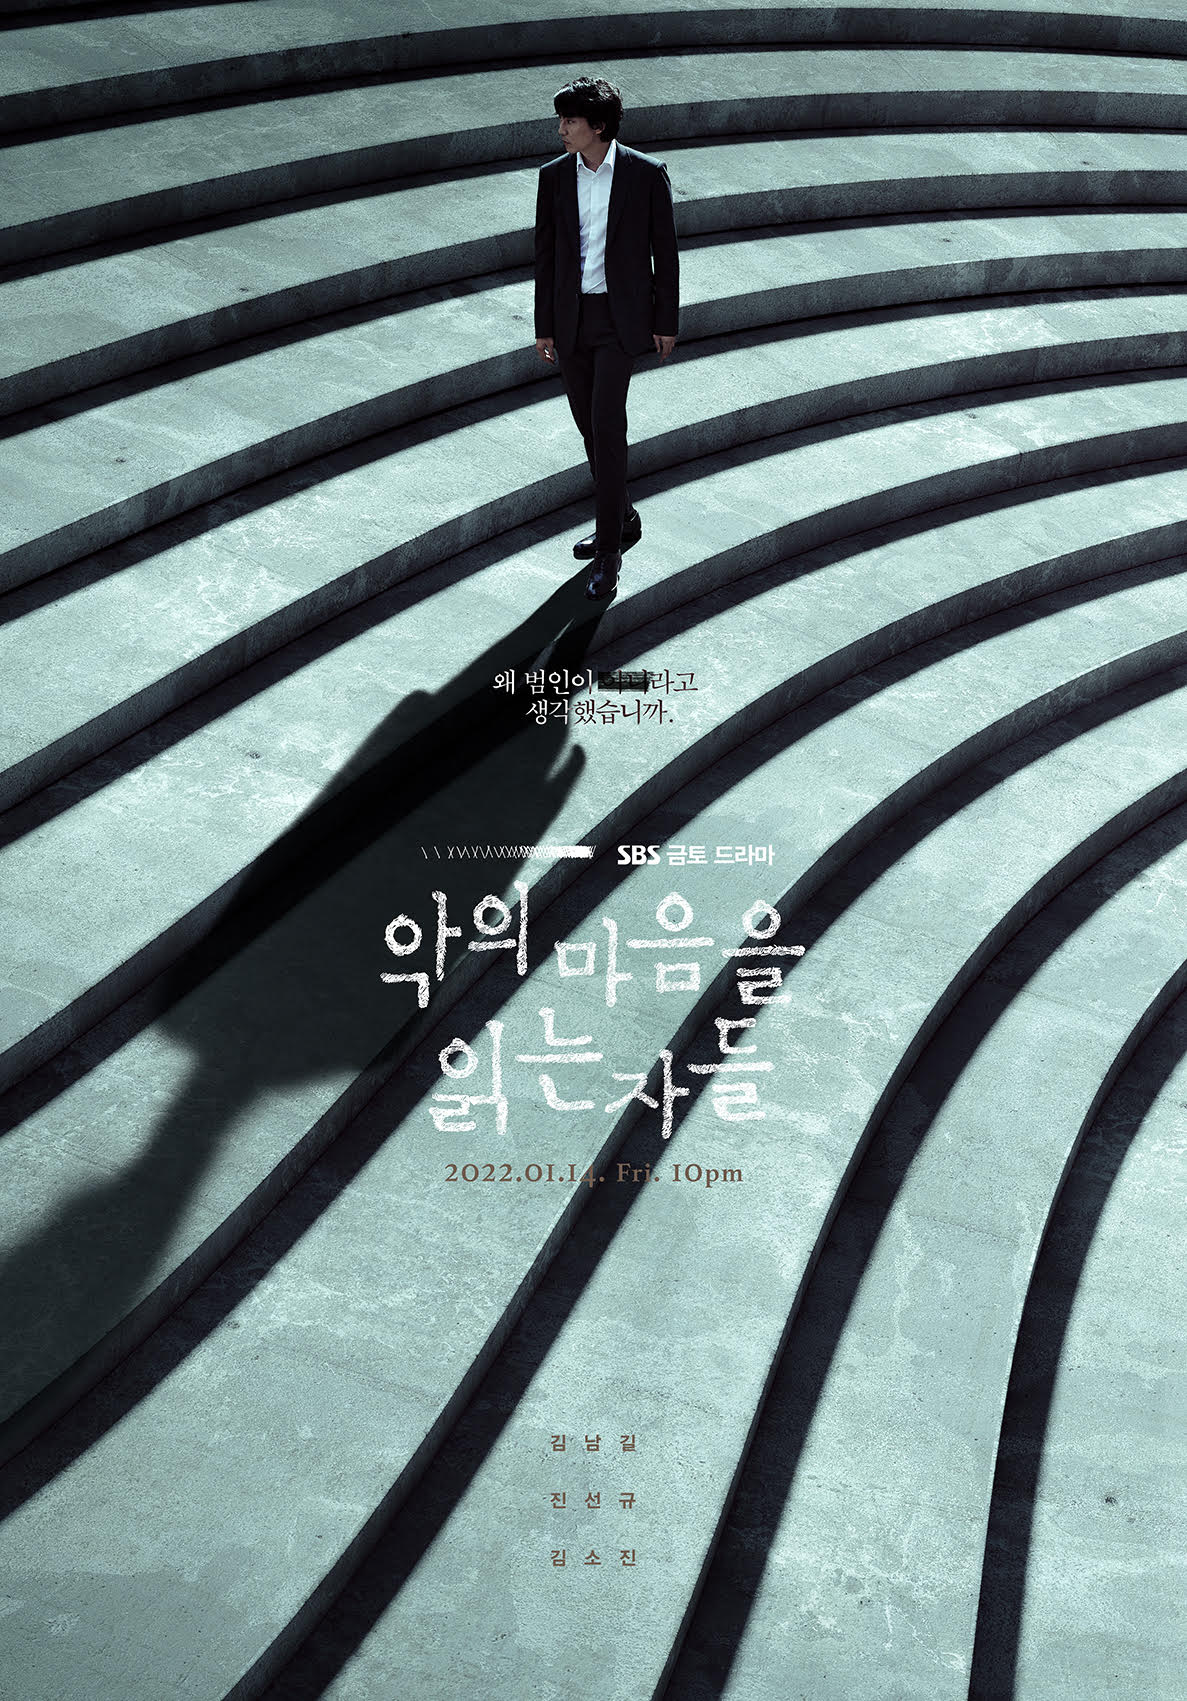 Kim Nam-gil begins investigating in Those Who Read Hearts of Evil